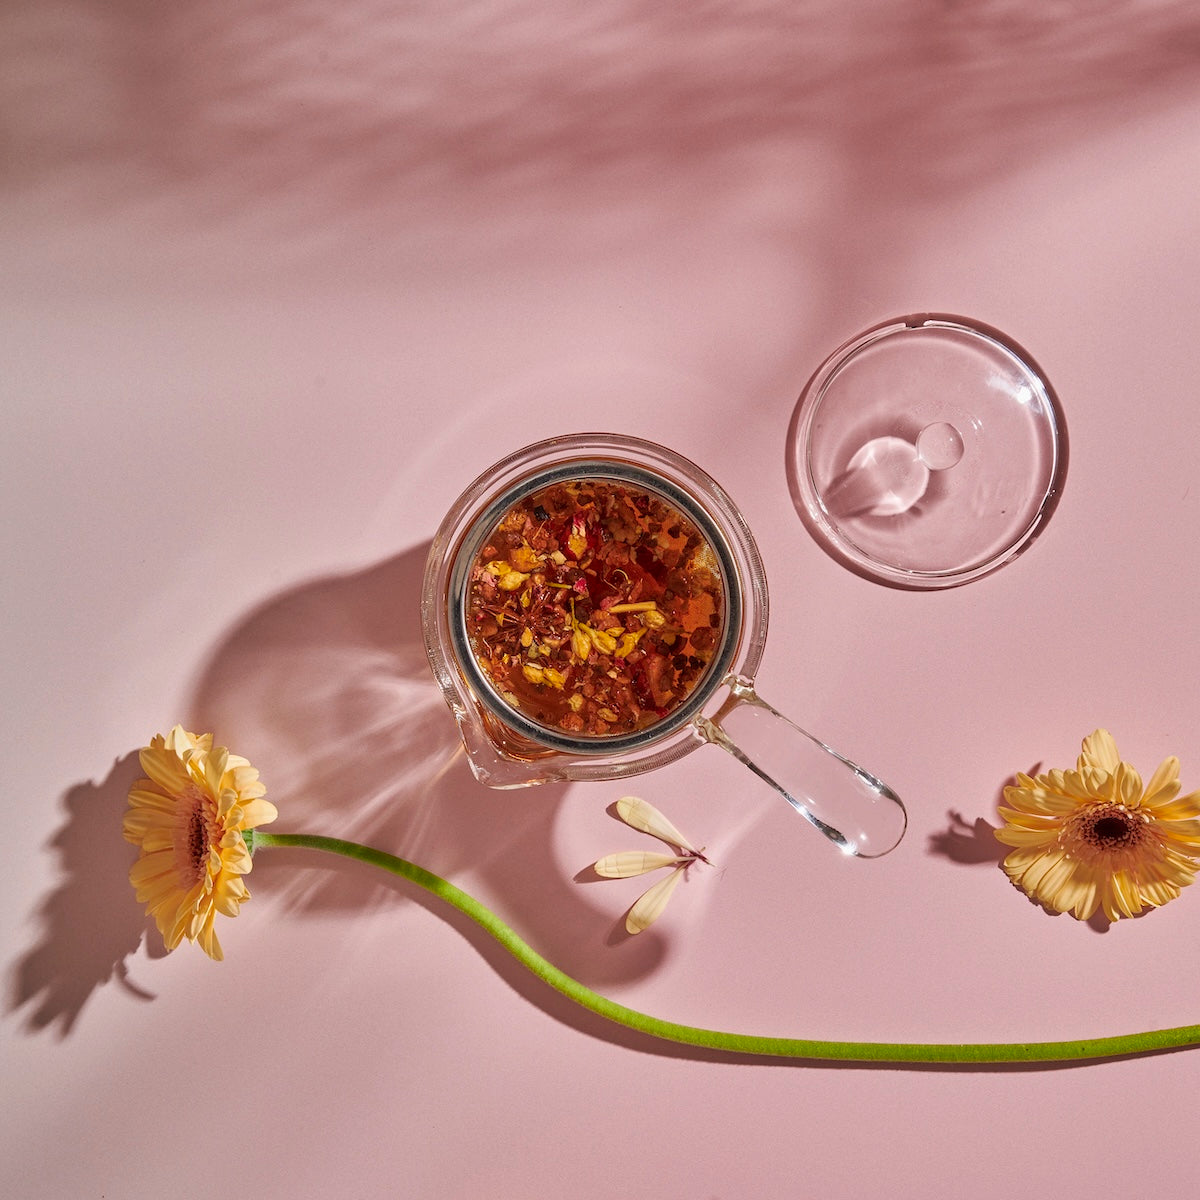 A top view of a borosilicate glass Espresso Parts Tea-in-Hand: The Perfect Steep Side-pour Ceremonial Teapot containing an infusion of loose leaf teas, positioned against a pale pink background. The teapot's lid is placed beside it. Two yellow daisies and a delicate dragonfly decoratively accompany the scene.